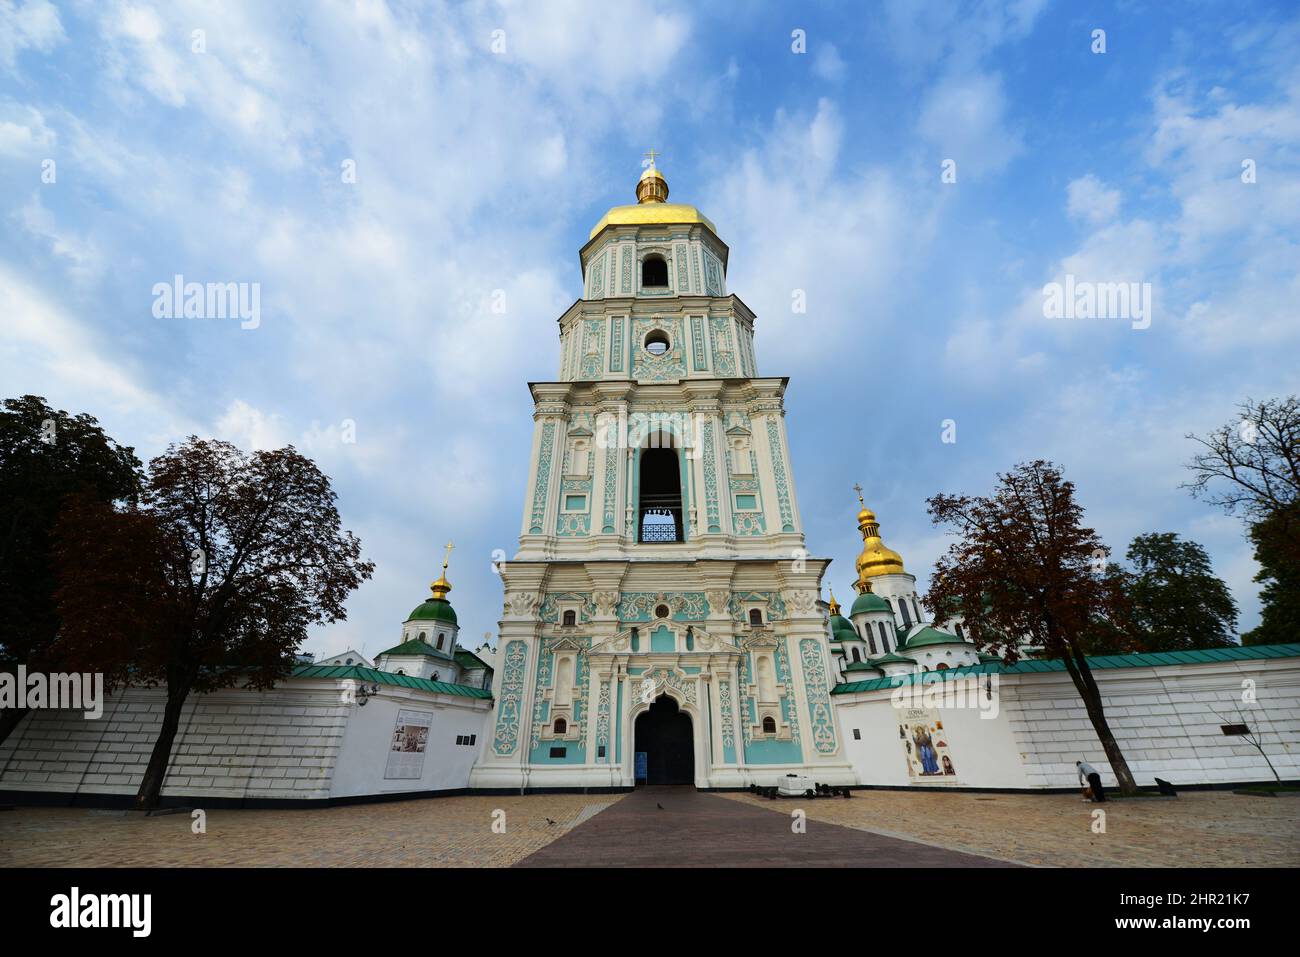 St. Sophia's Cathedral in the heart of Kyiv, Ukraine. Stock Photo